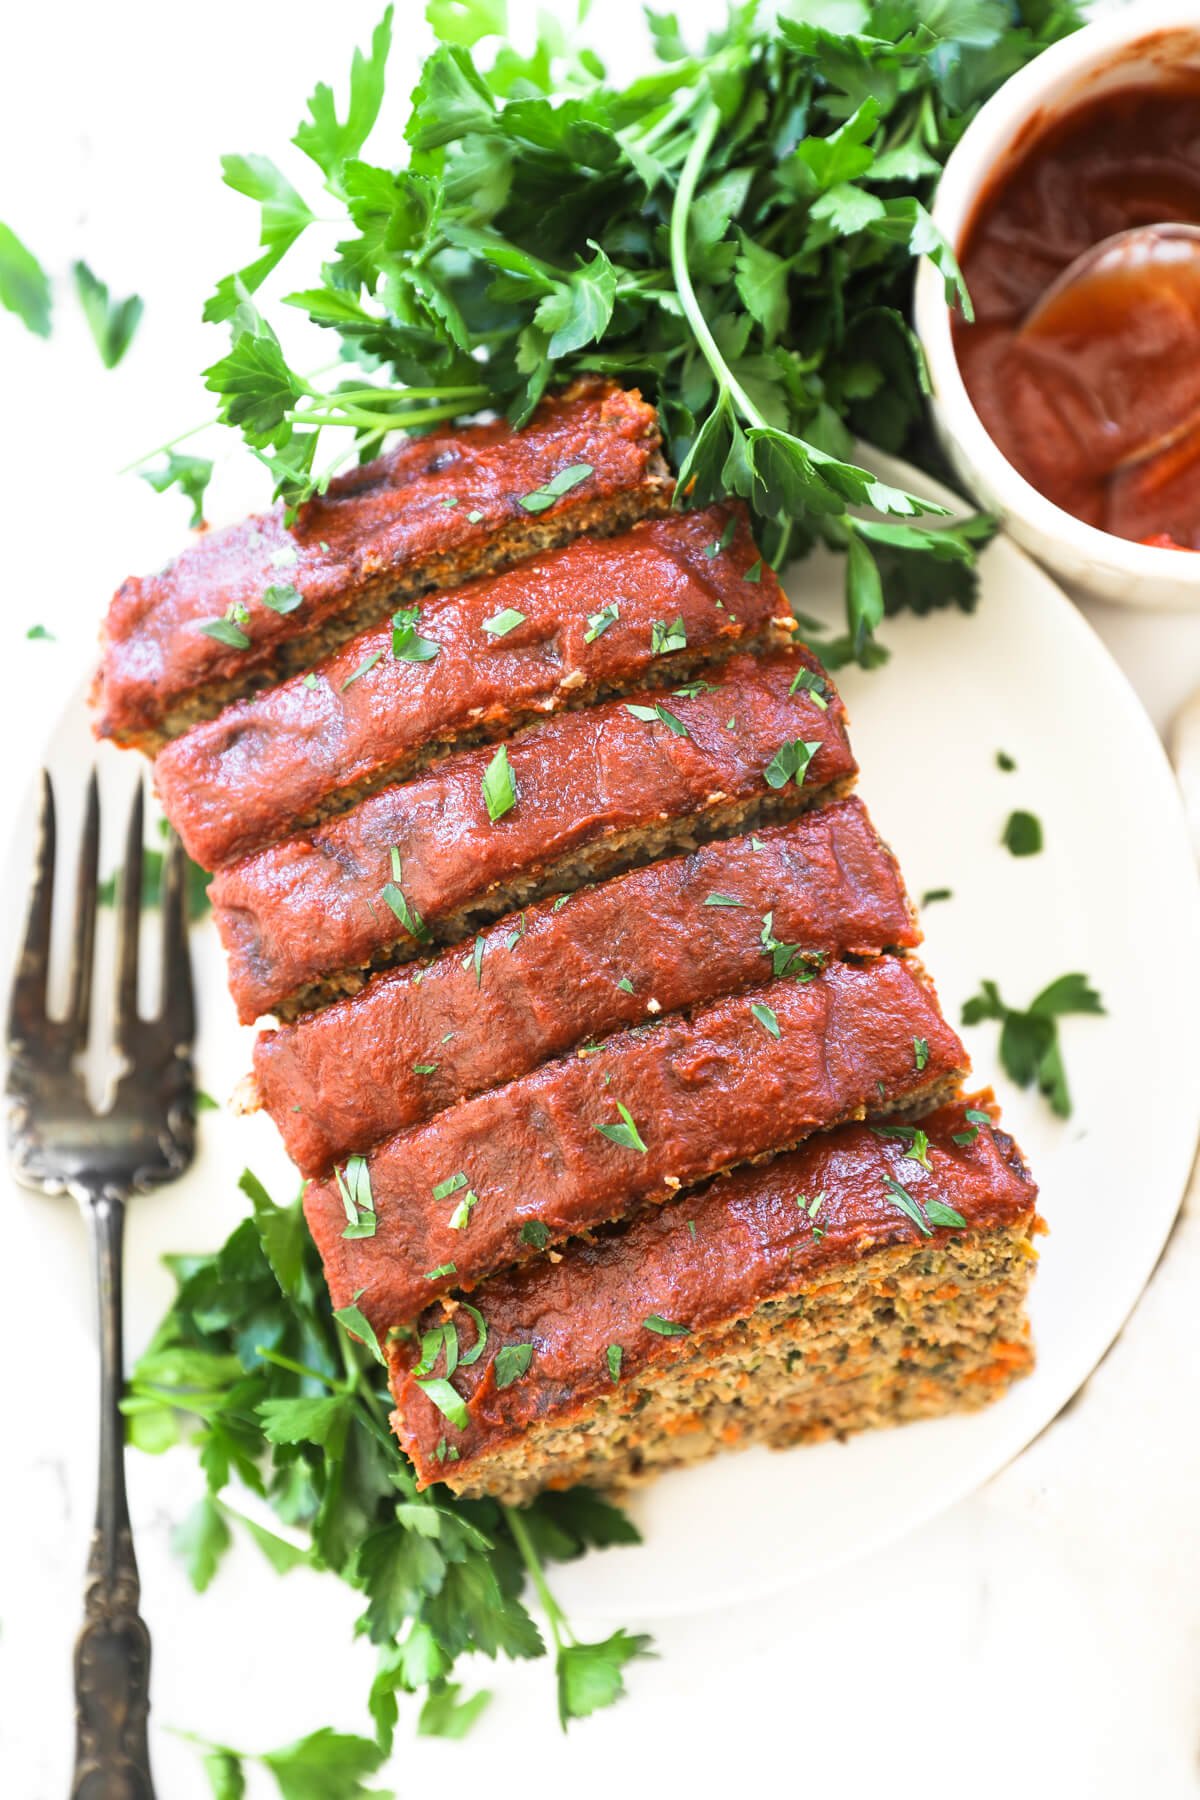 Overhead image of several pieces of meatloaf on a plate with a large fork and extra ketchup and parsley on the side.